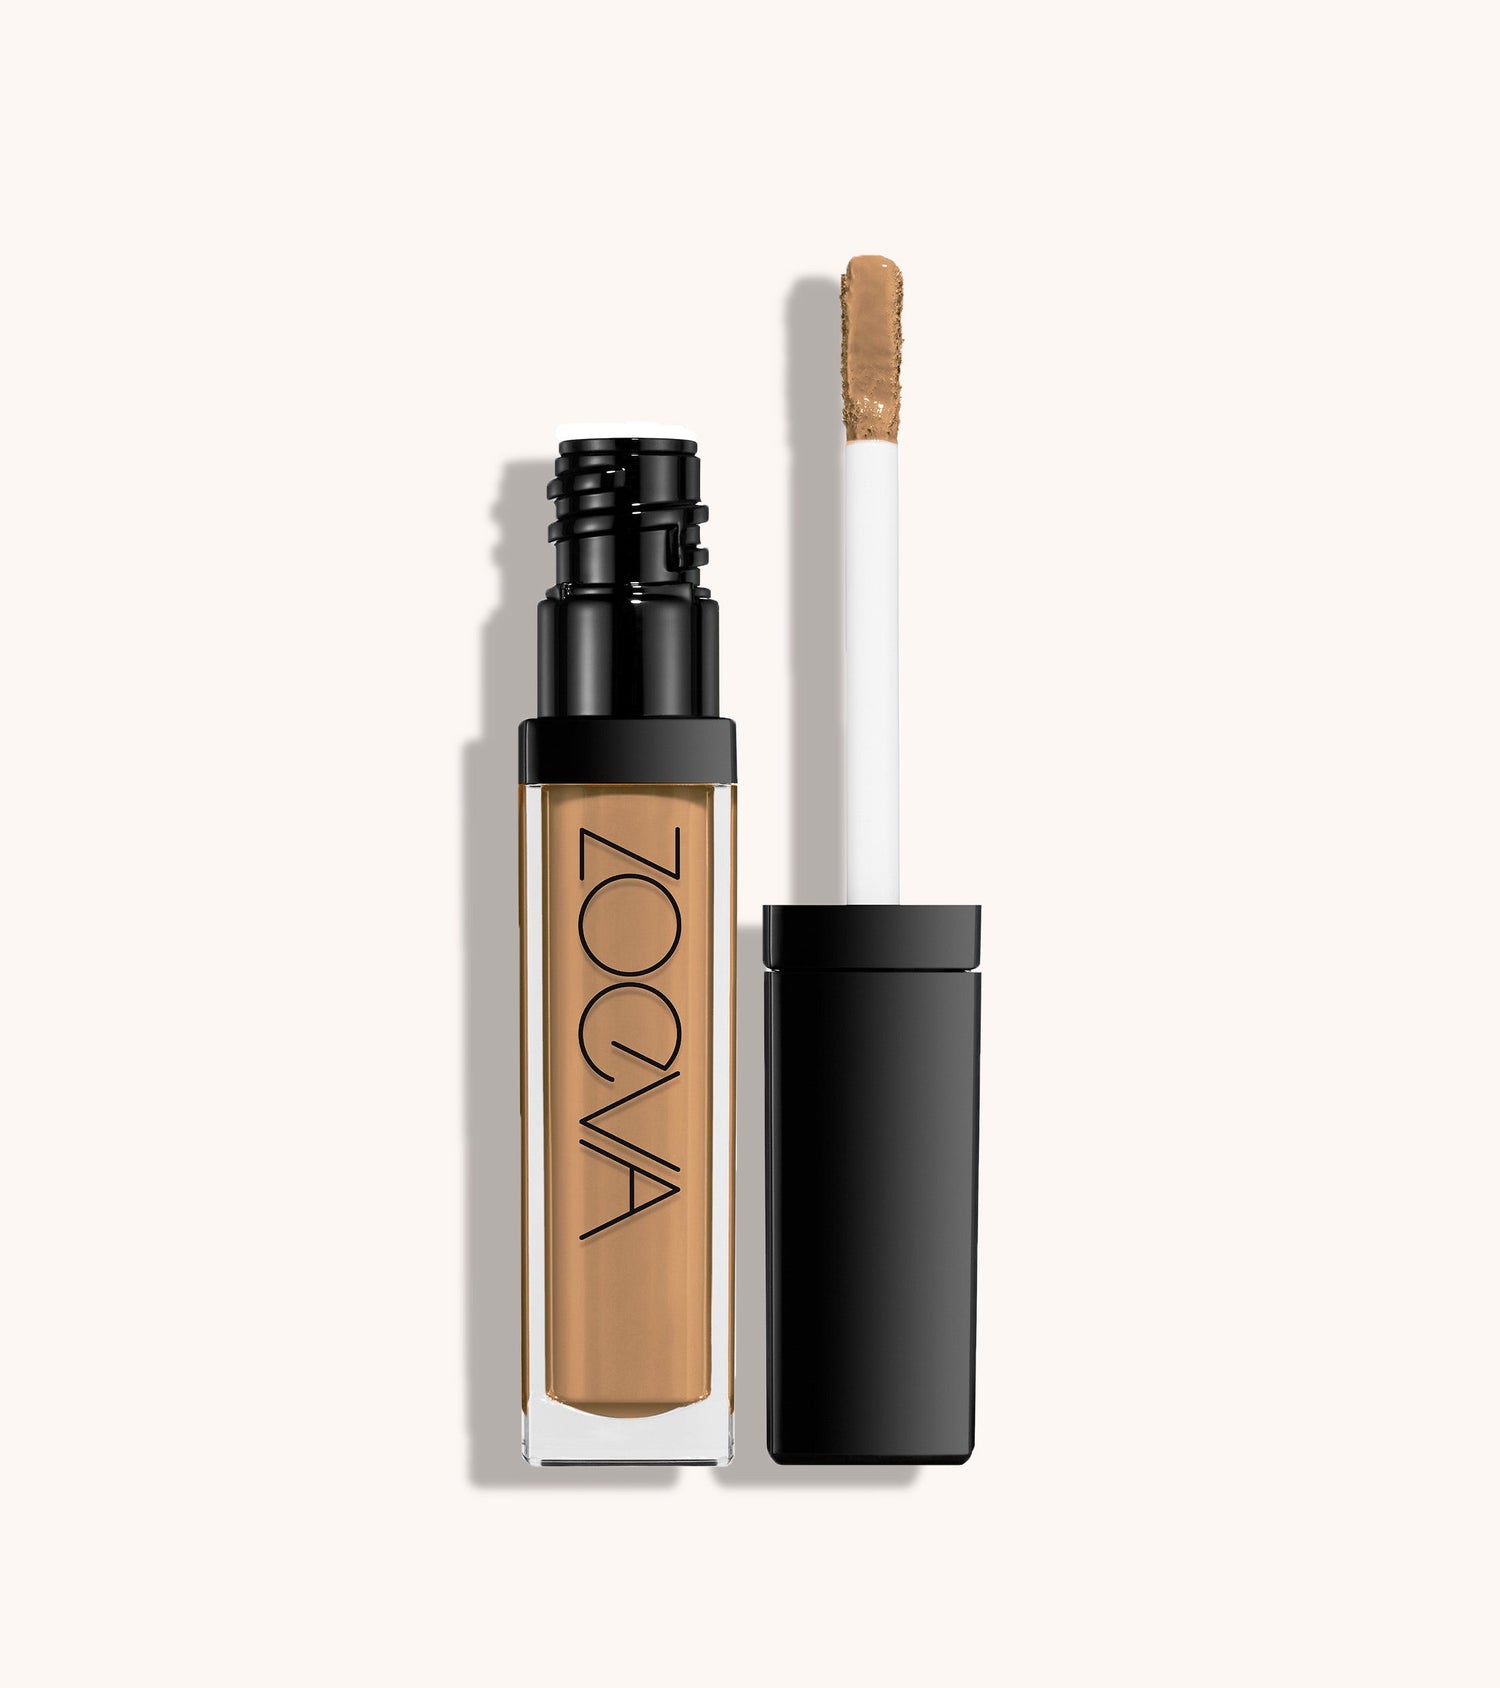 Authentik Skin Perfector Concealer (170 Live) Main Image featured